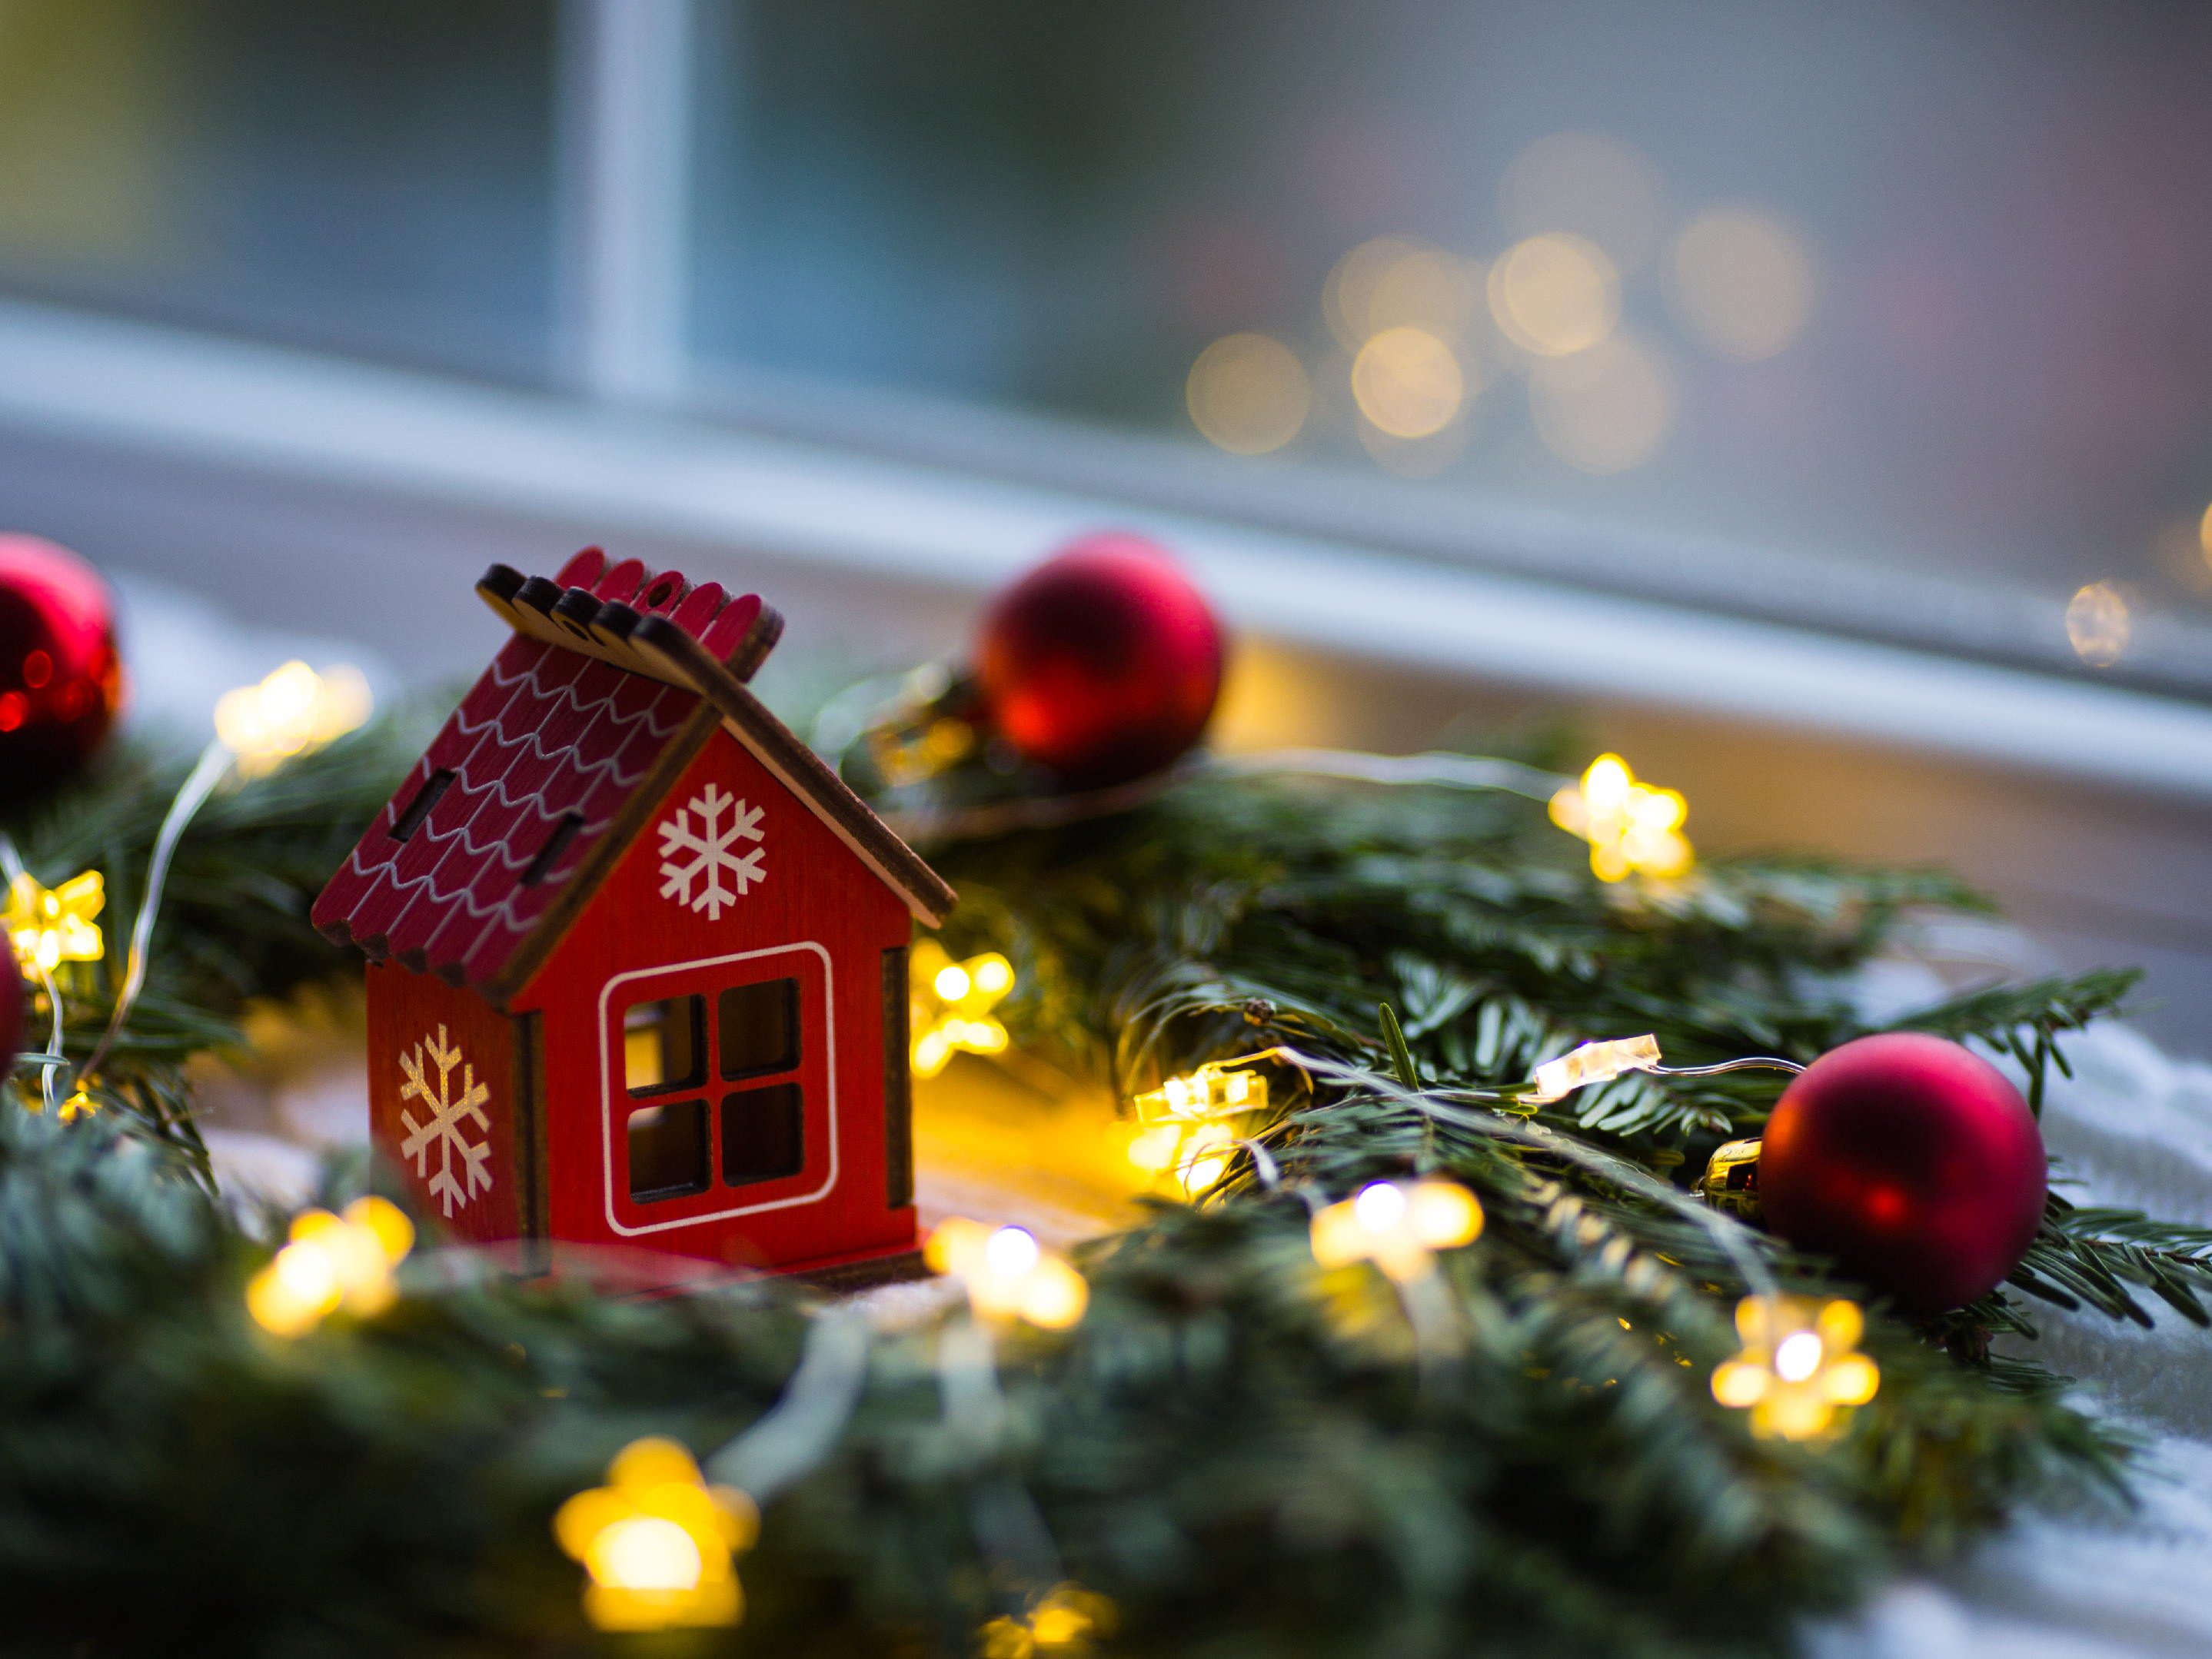 How to decorate your home for Christmas as a tenant